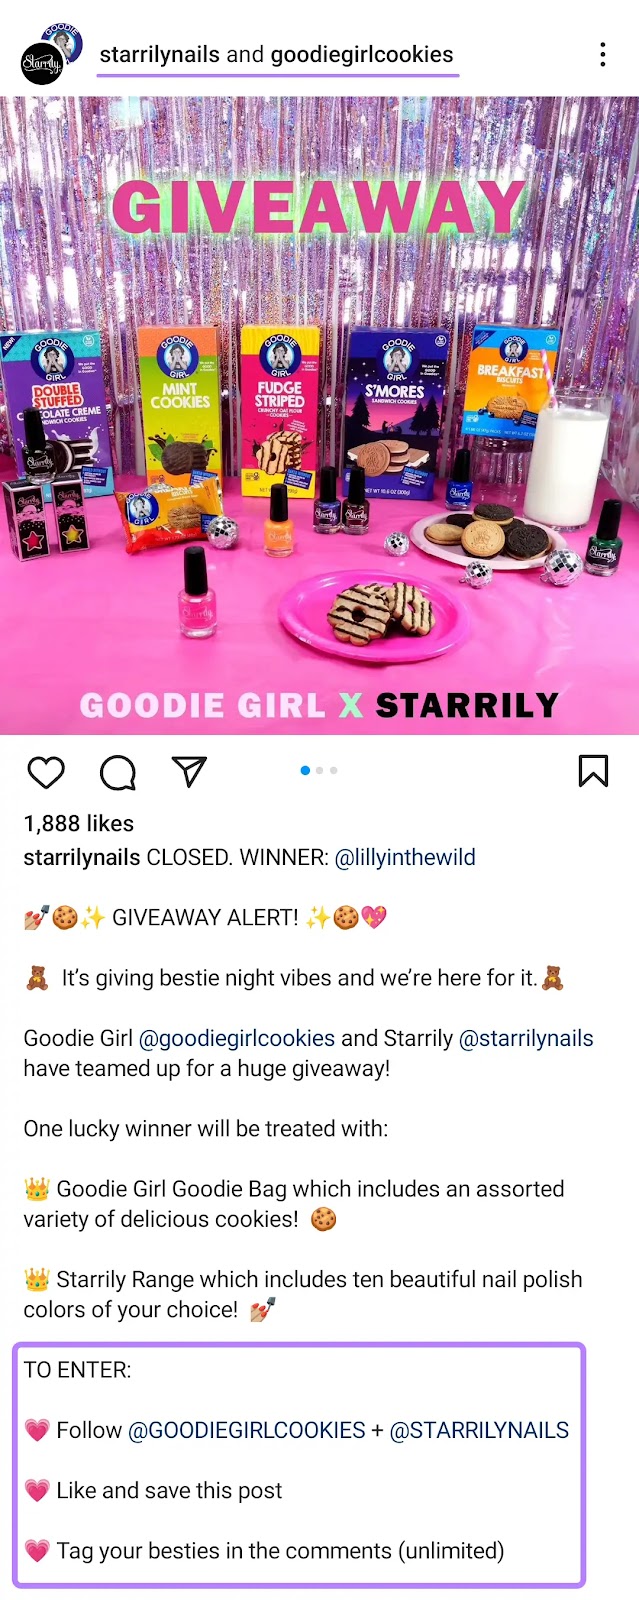 An example of Instagram giveaway by Goodie Girl and Starrily, in which participants have to follow both accounts in order to participate